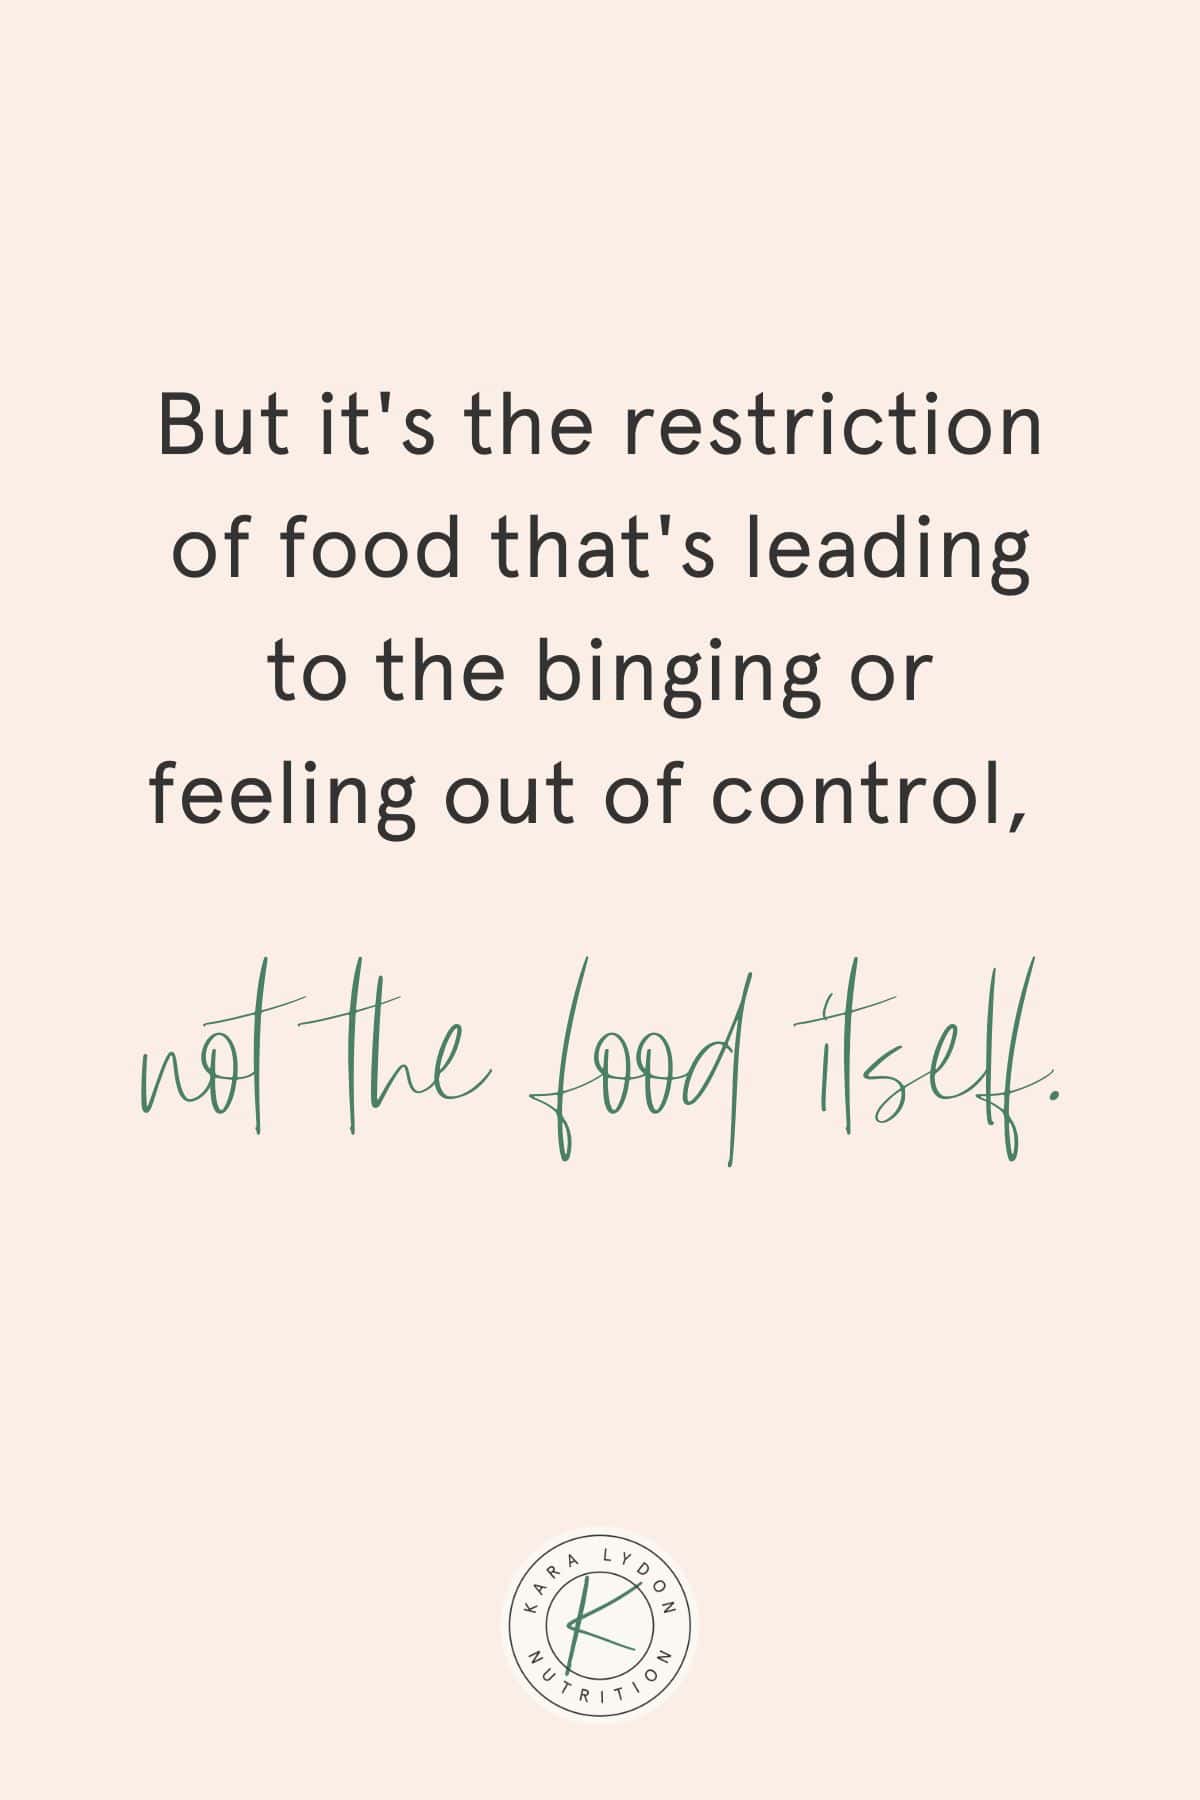 Graphic with quote: "But it's the food restriction that causes binge eating or the feeling of loss of control, not the food itself."